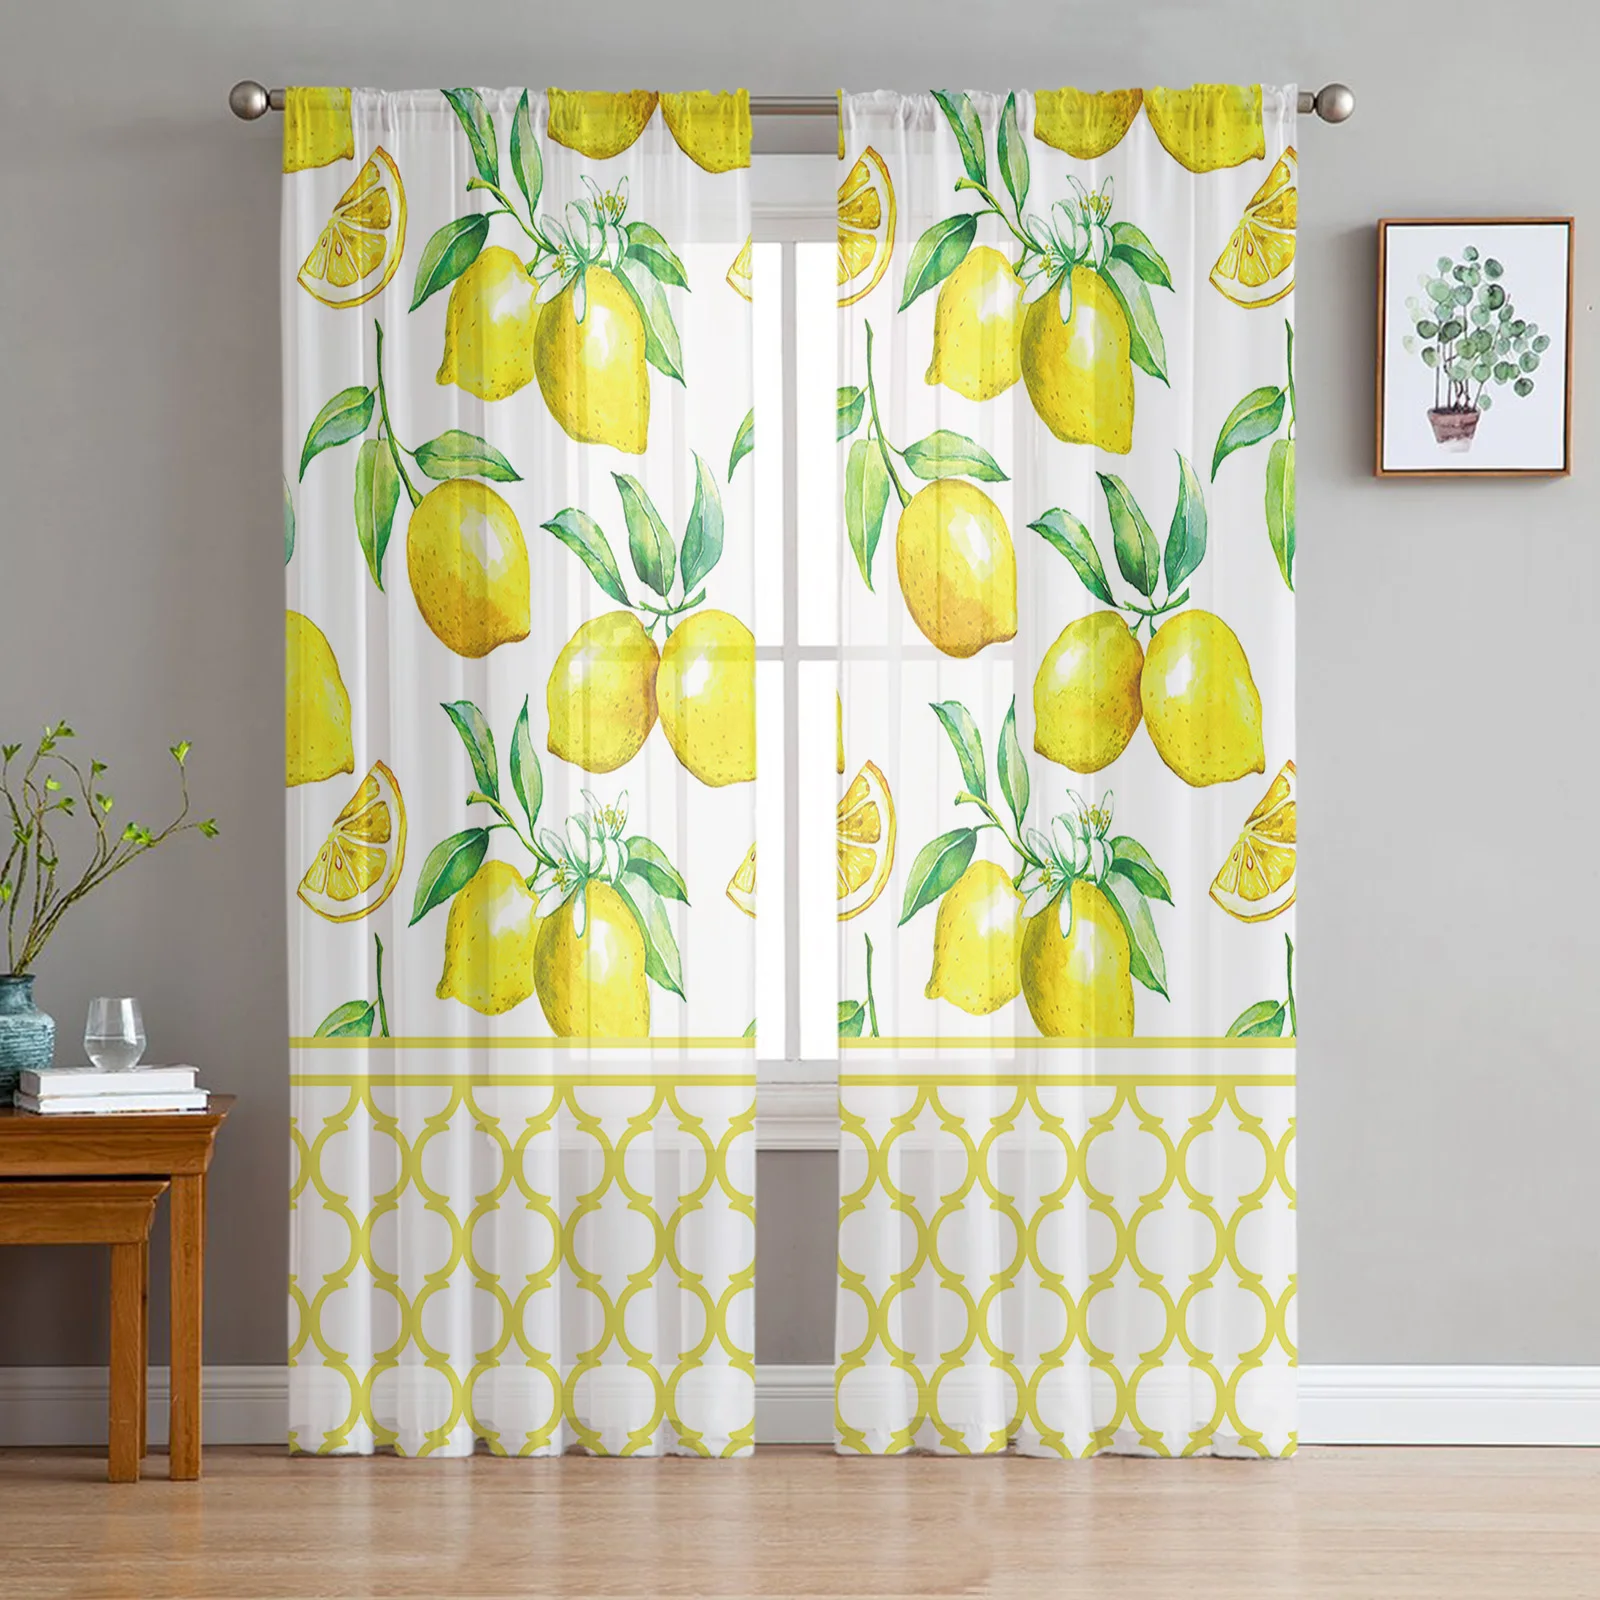 

Fruit Fresh Lemon Yellow Moroccan Tulle Curtains Living Room Kitchen Decoration Chiffon Window Treatments Voile Sheer Curtain